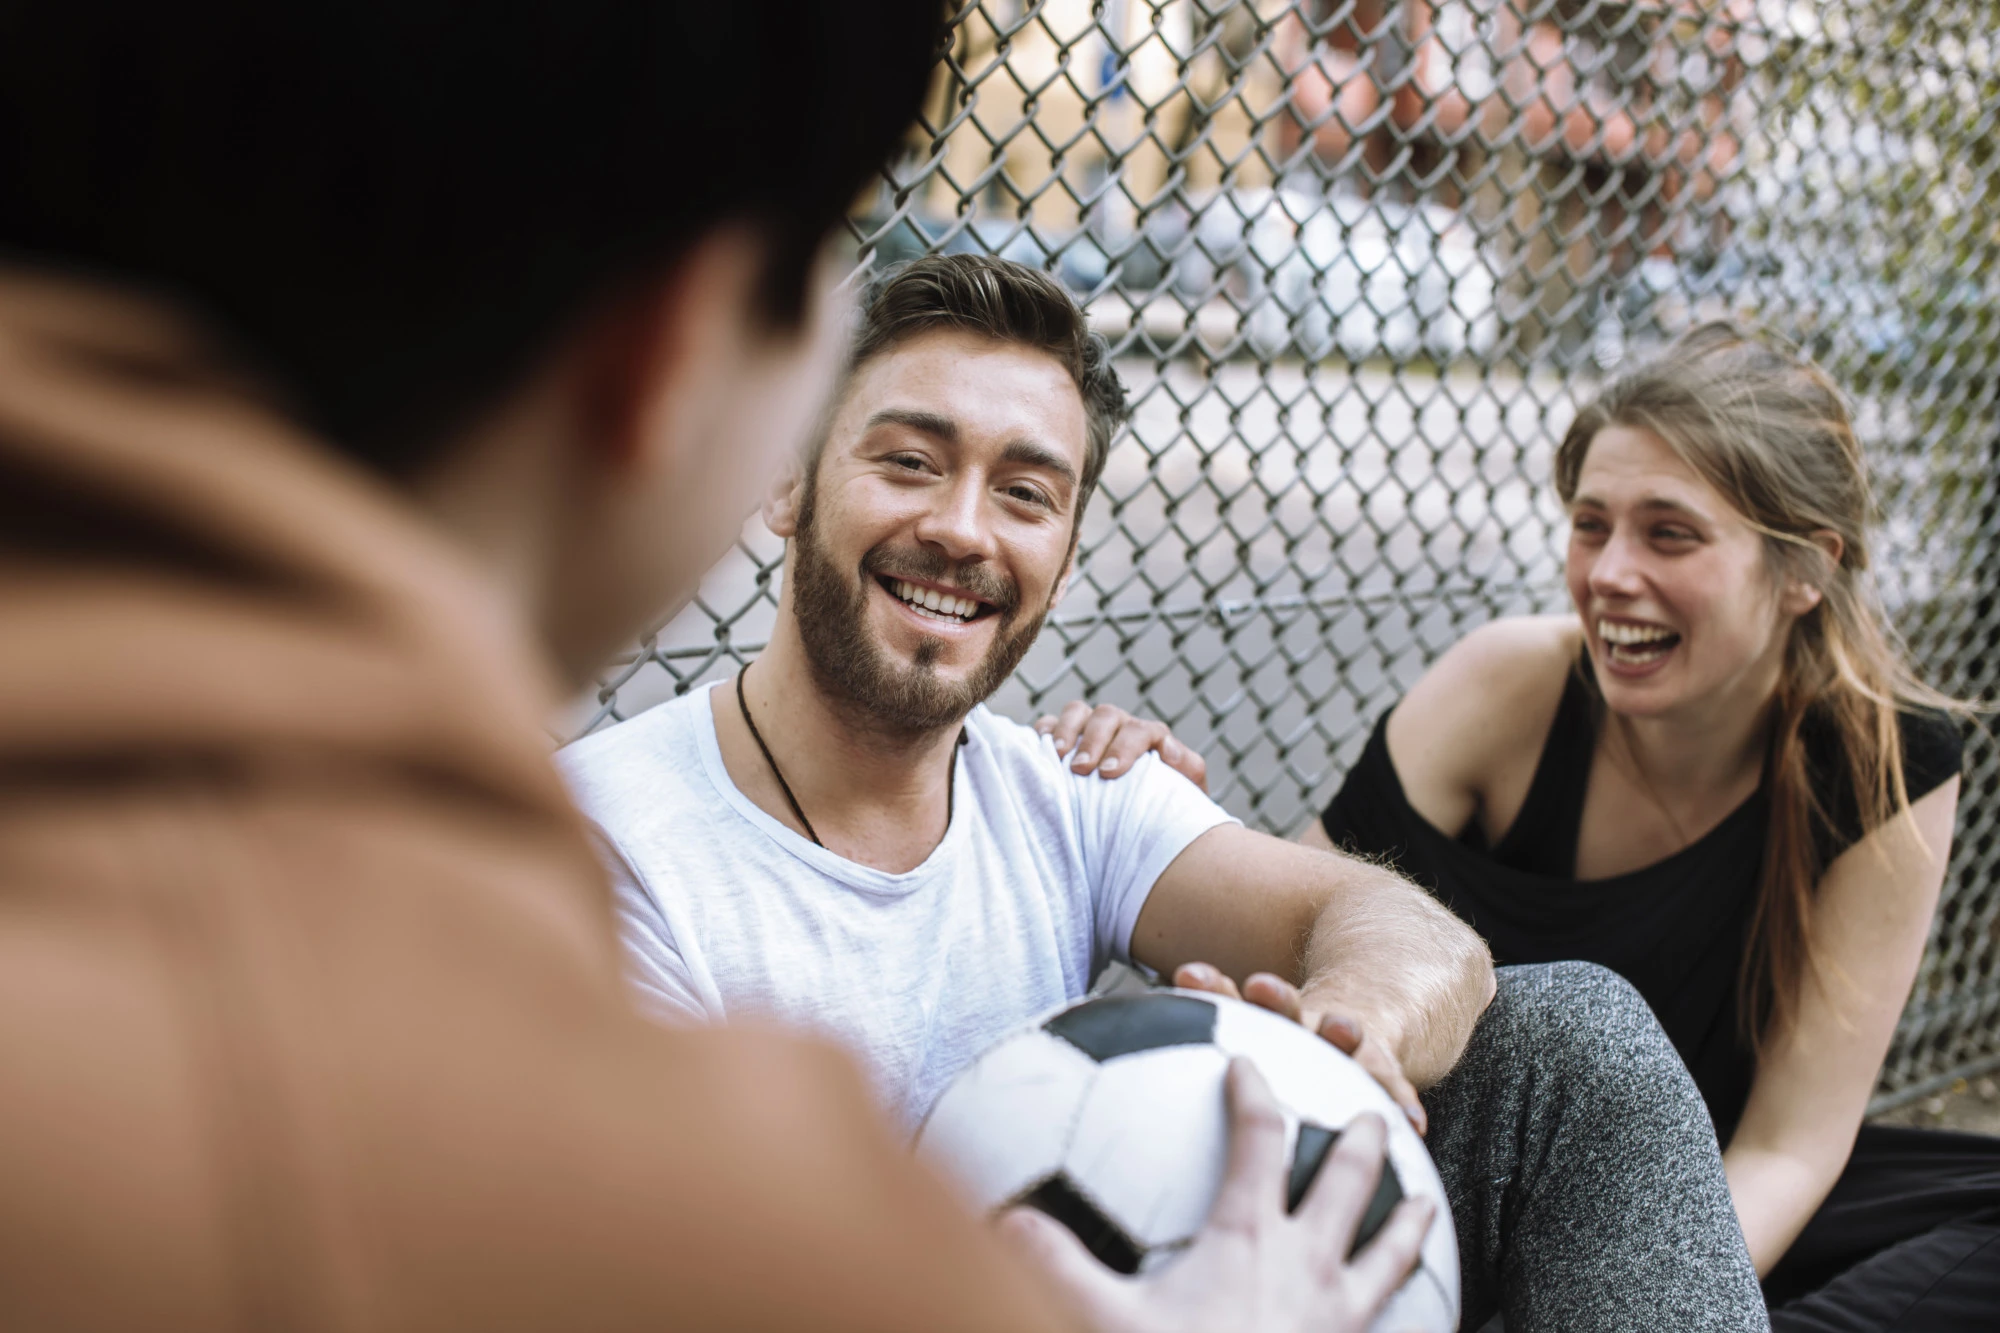 group of 3 people sitting and talking leaning against a fence with a soccer ball